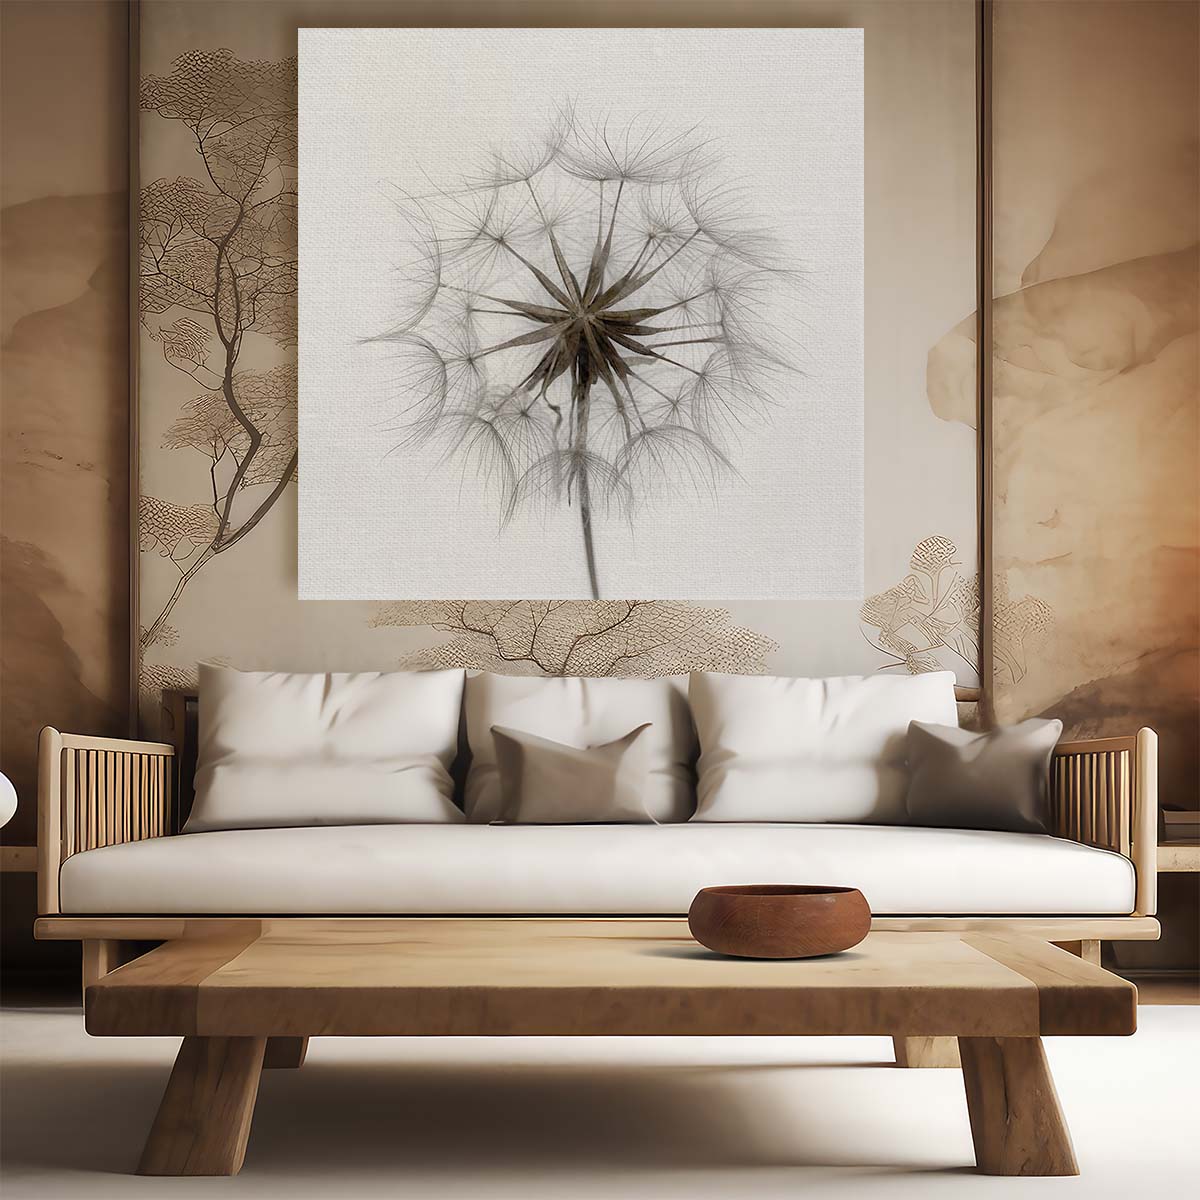 Tragopogon Minimalist Macro Photography Wall Art by Luxuriance Designs. Made in USA.